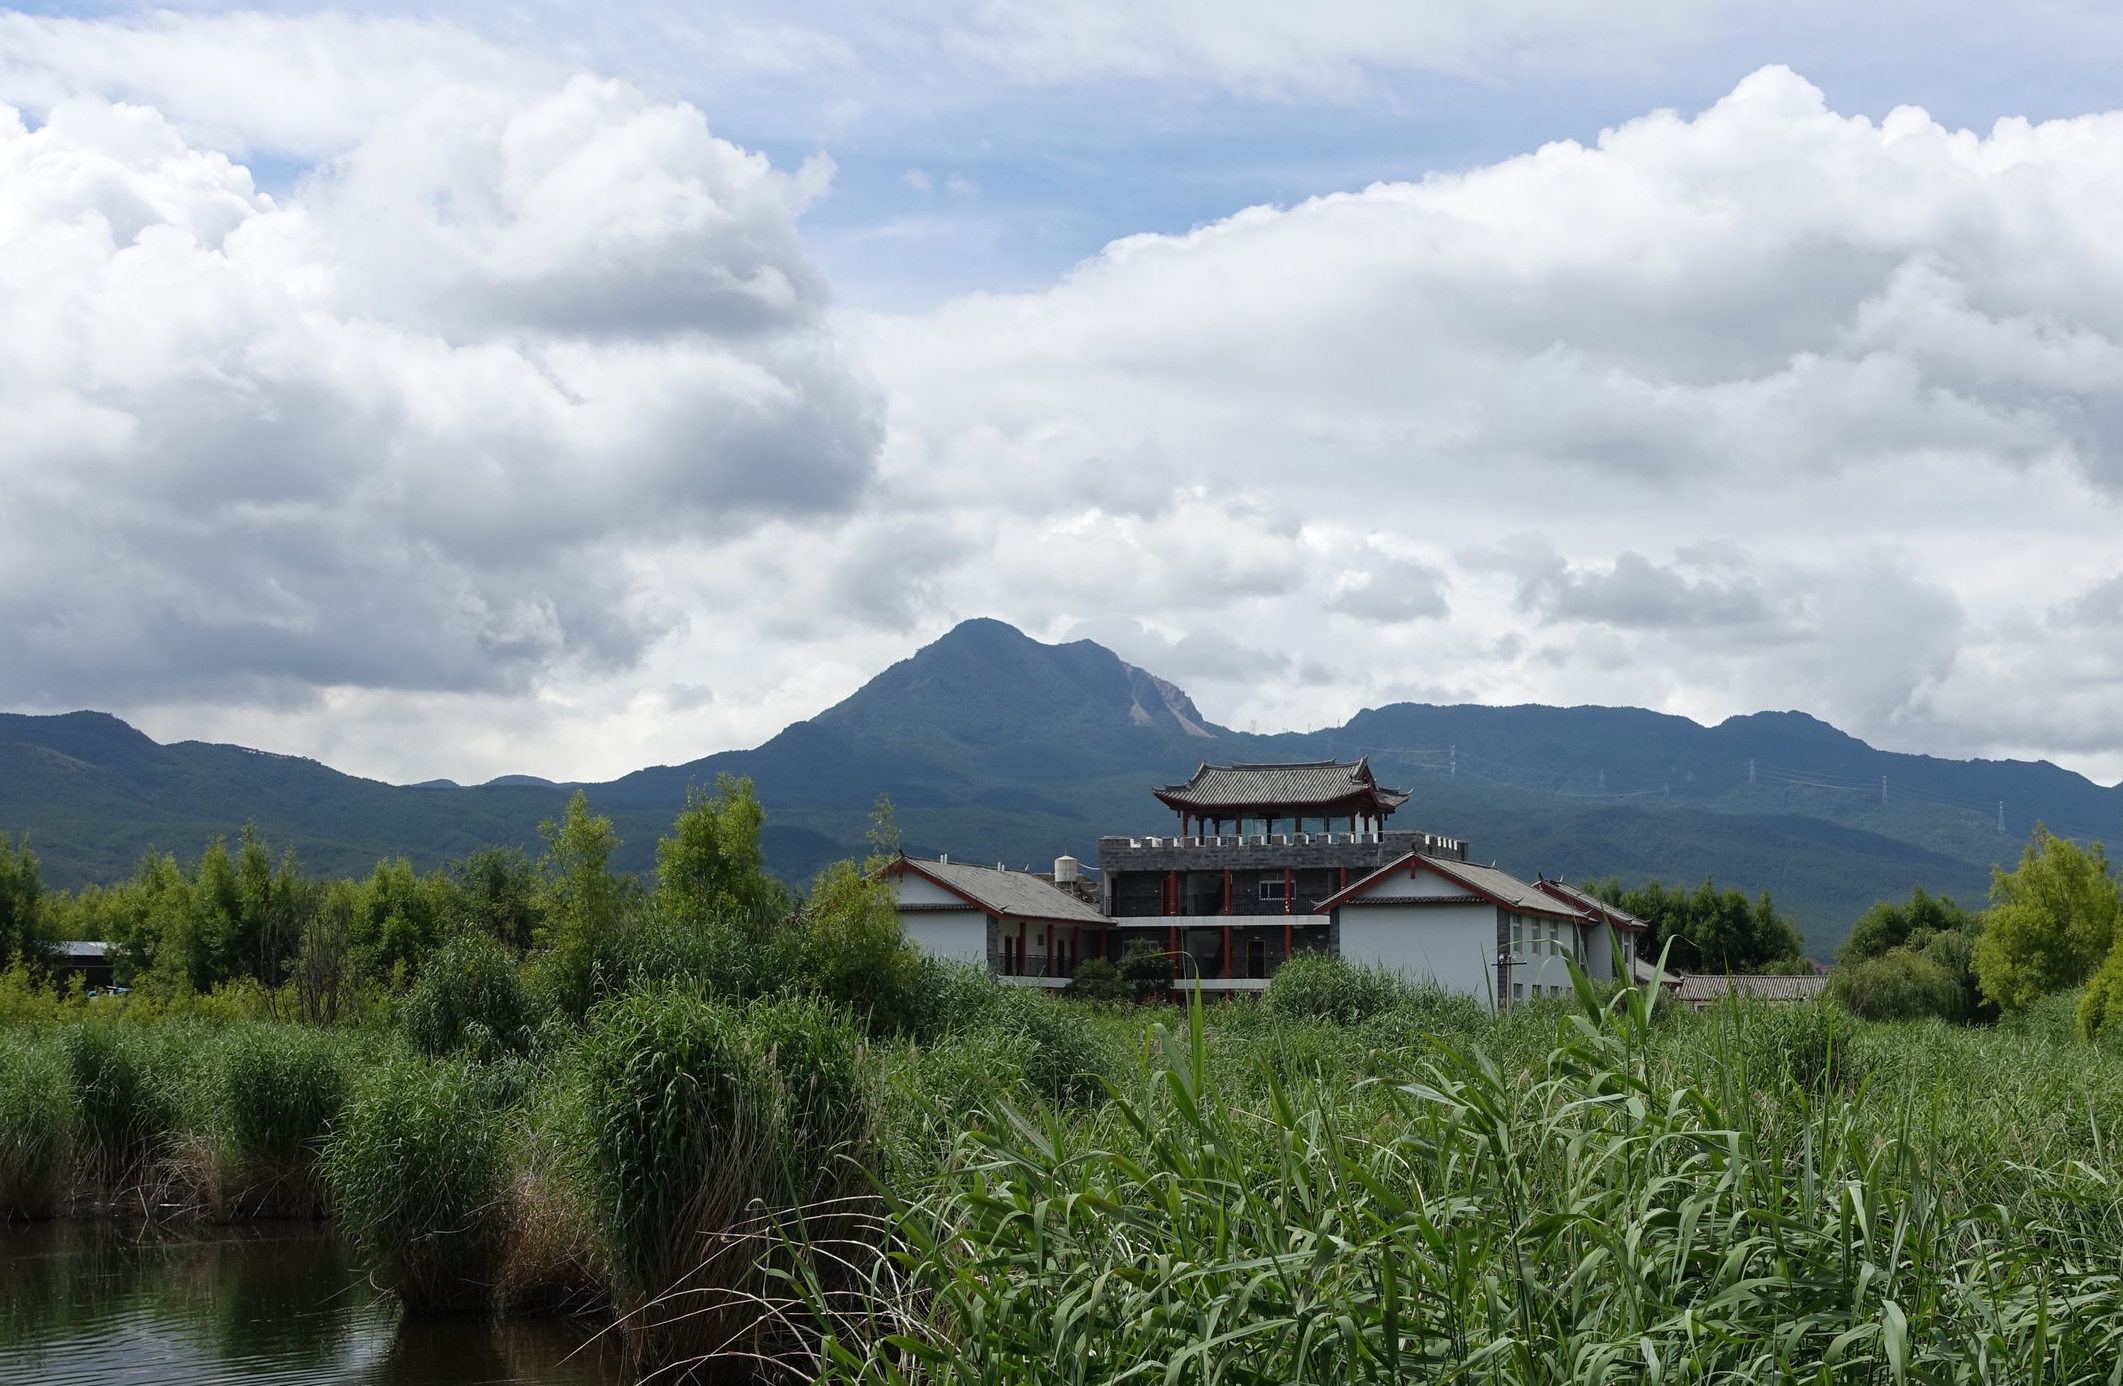 The GEC is conveniently located next to the Lashihai Wetland Reserve Bureau.